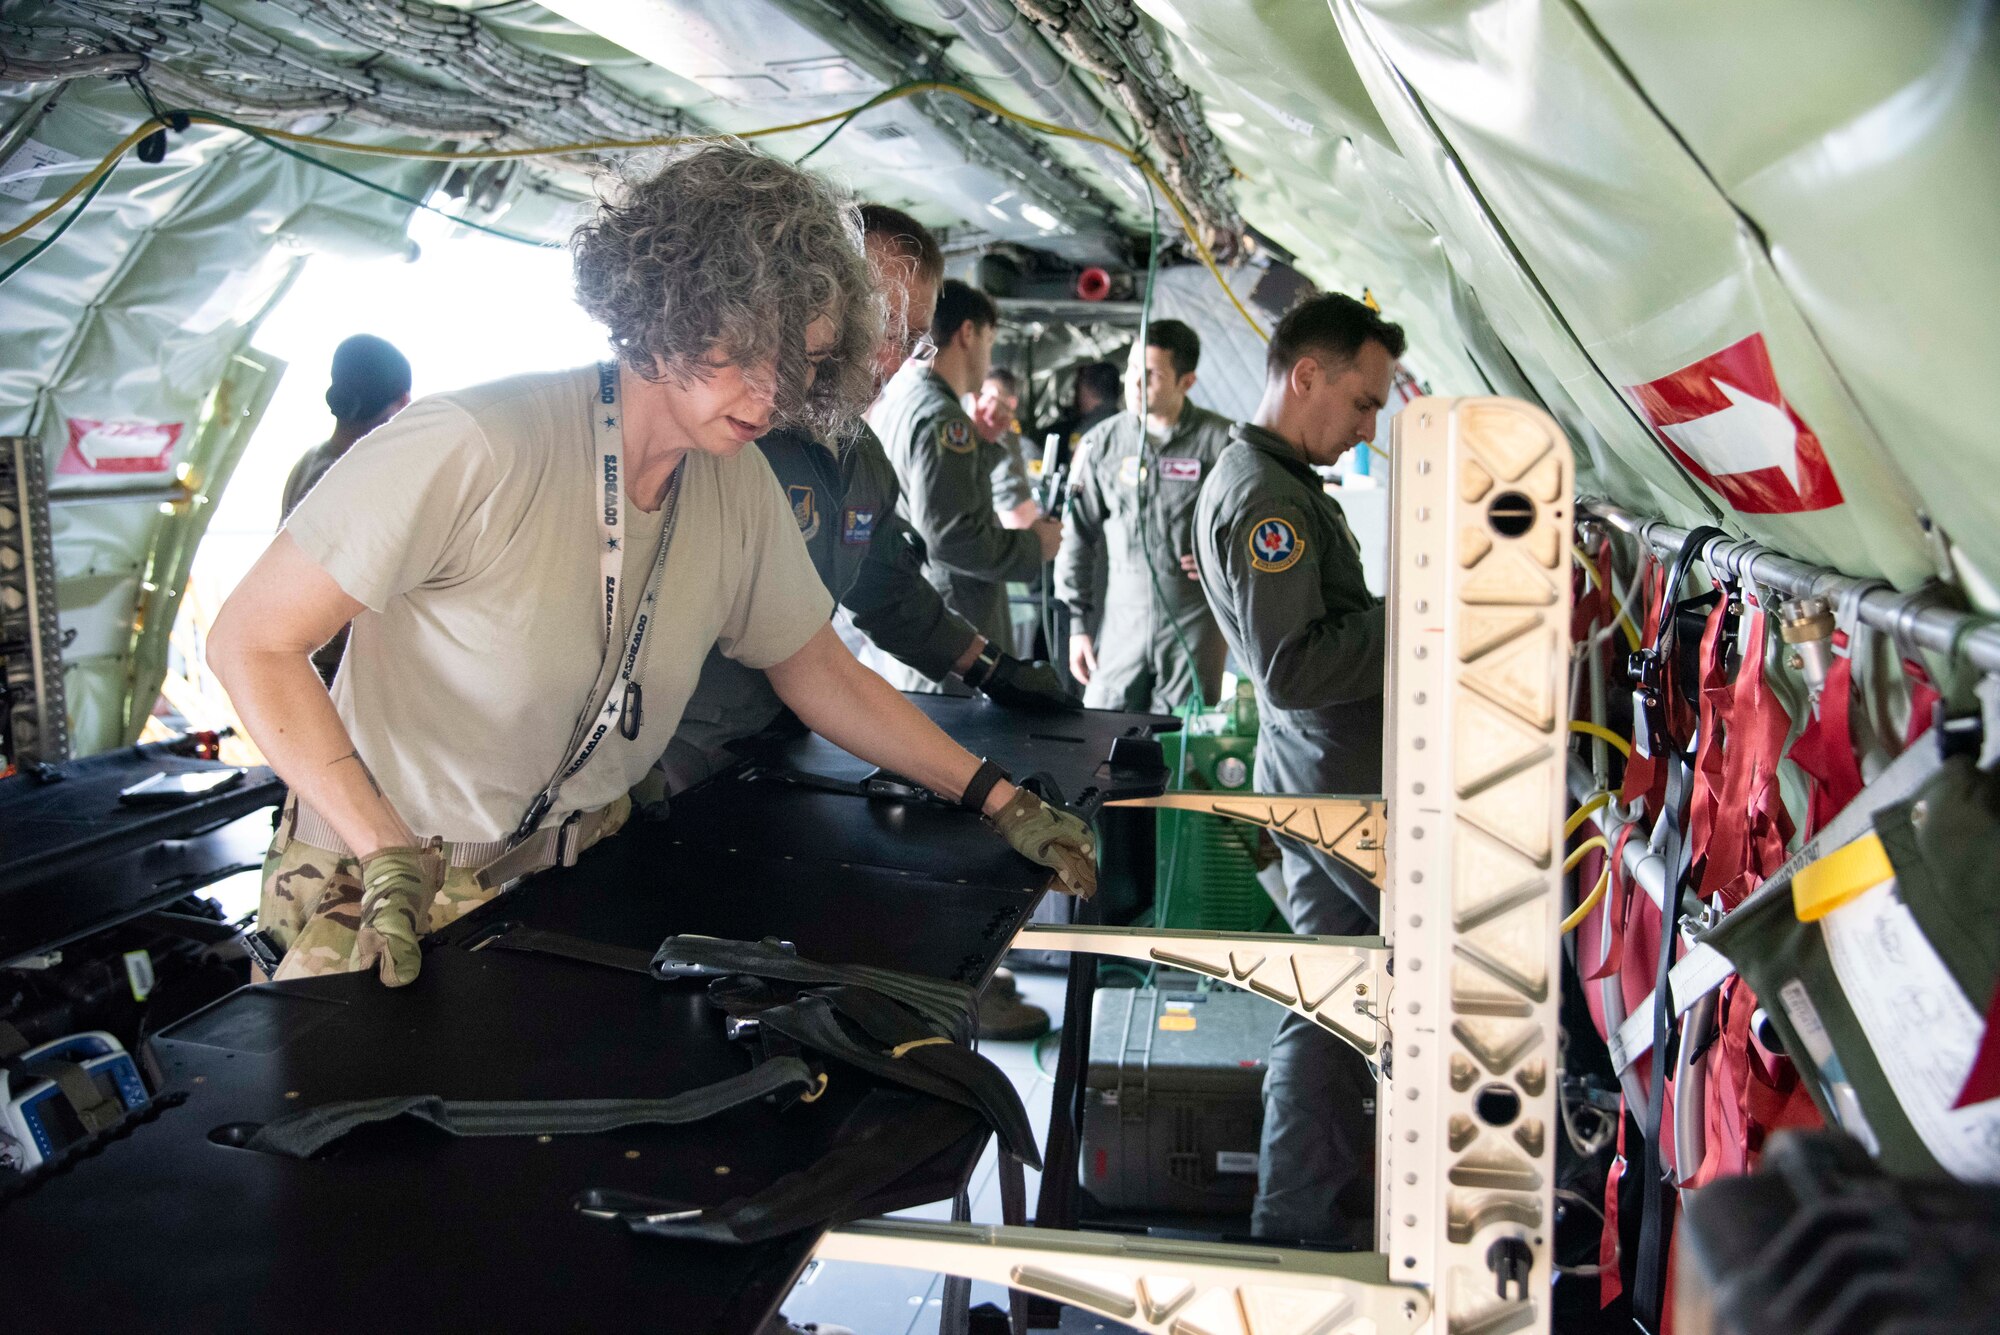 U.S. Air Force Capt. Tracy Minke, 18th Aeromedical Evacuation Squadron flight nurse, sets-up a specialized litter rack on a 384th Air Refueling Squadron KC-135 Stratotanker during an AE exercise near Kadena Air Base, Japan, Feb. 19, 2019. AE teams use specialized gear to safely secure critical care patients and maximize space on an aircraft, convert aircraft power to their medical equipment, and protect medics and patients in the event of an in-flight emergency. (U.S. Air Force photo by Senior Airman Ryan Lackey)